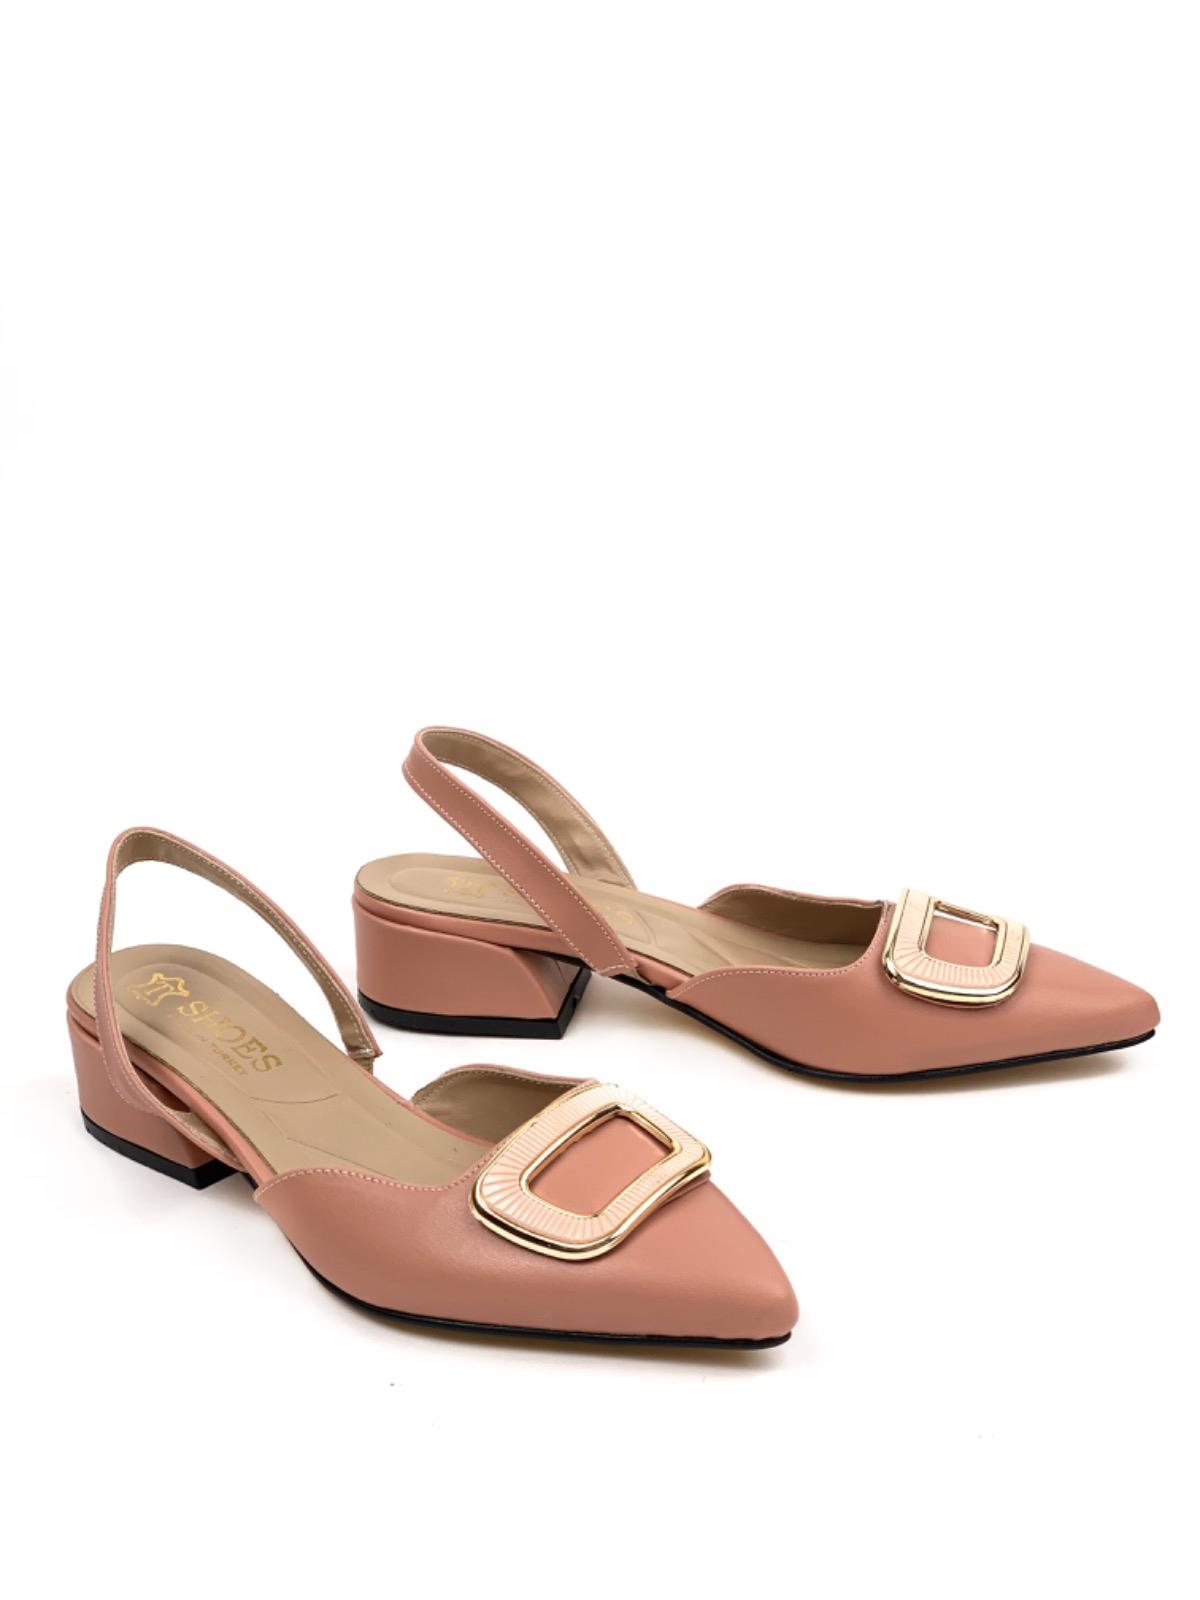 Women's Square Dusty Rose Low Heel Open Back Square Buckle Sandals Slippers - STREETMODE™